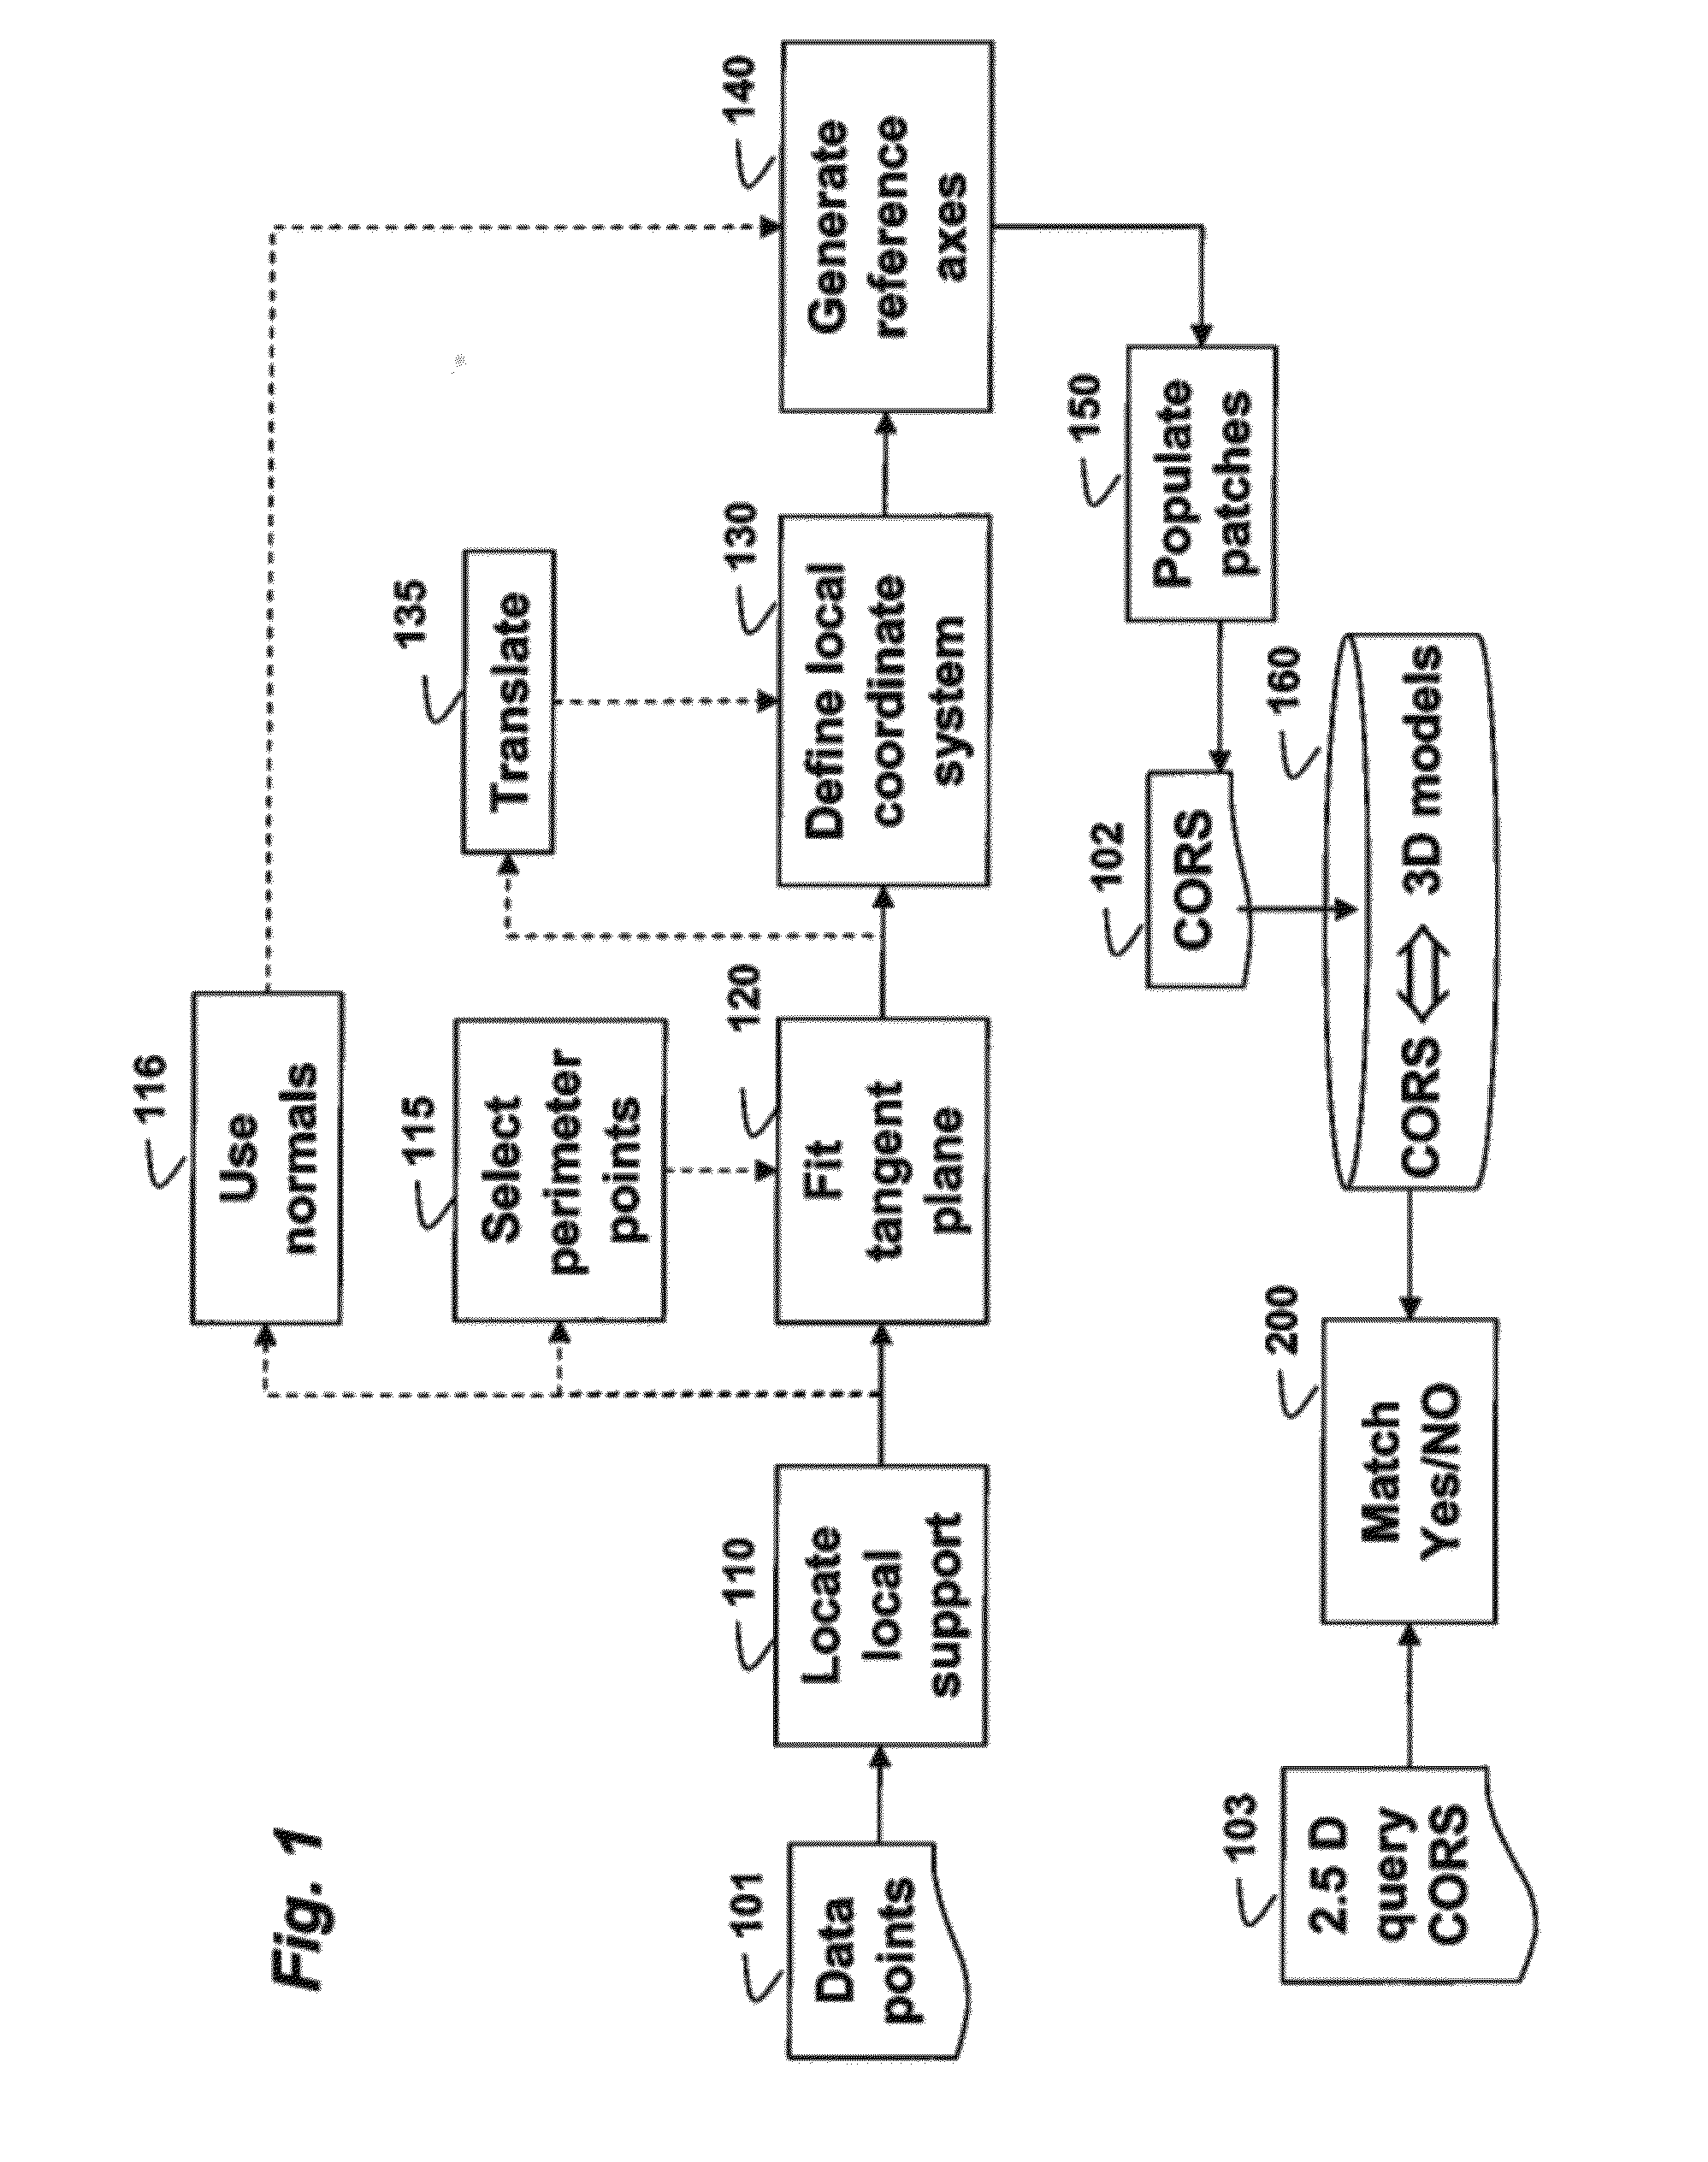 Method for Representing Objects with Concentric Ring Signature Descriptors for Detecting 3D Objects in Range Images